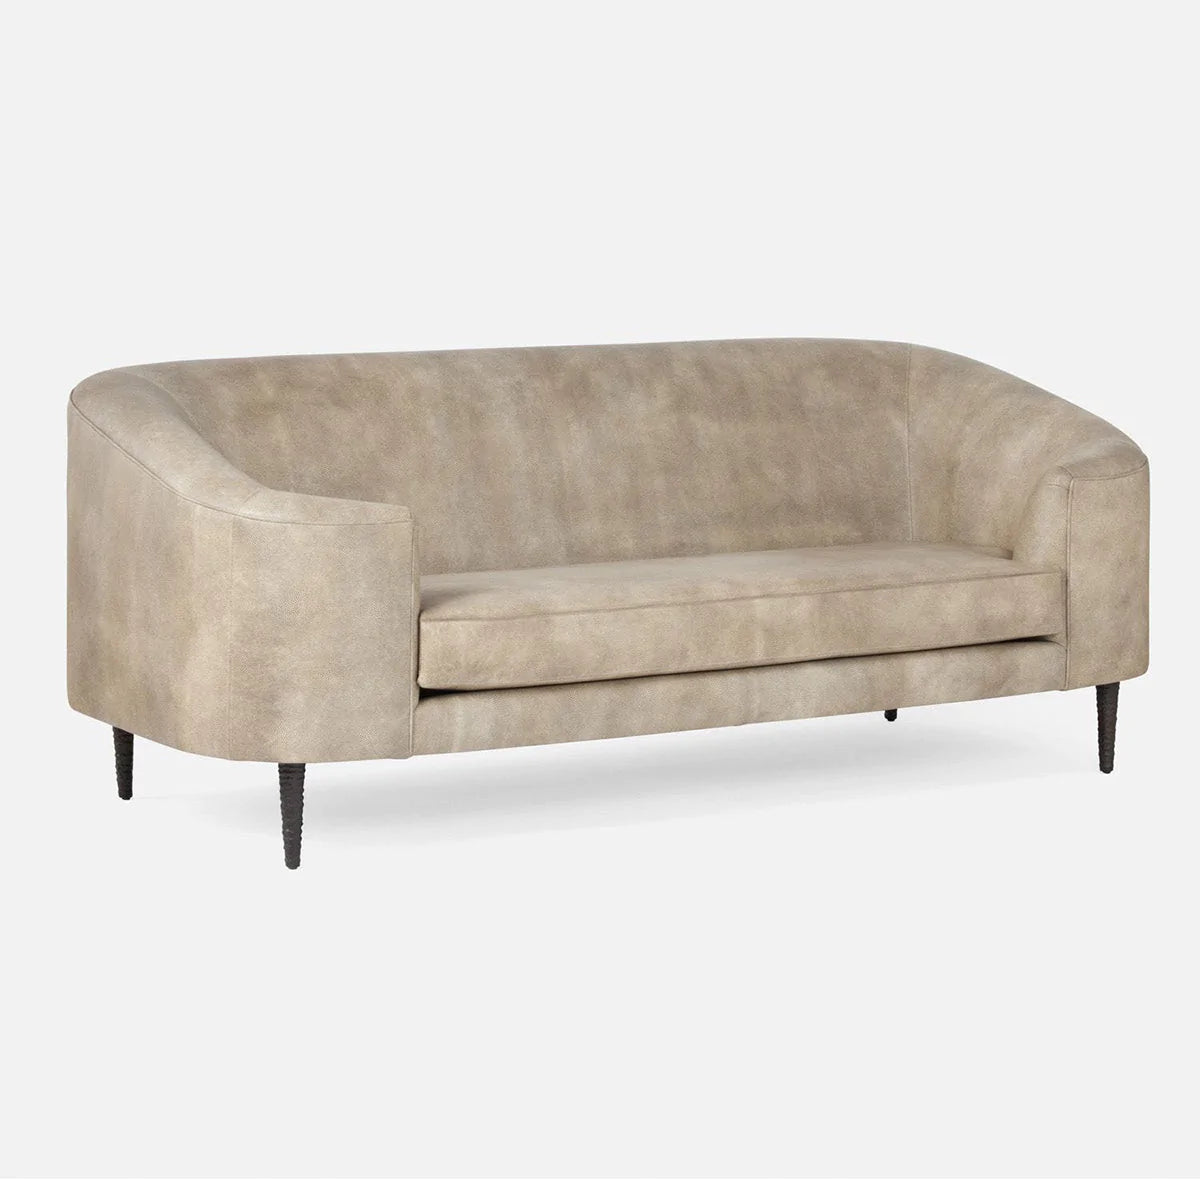 Made Goods Basset Contemporary Cabriole-Style Sofa in Weser Fabric